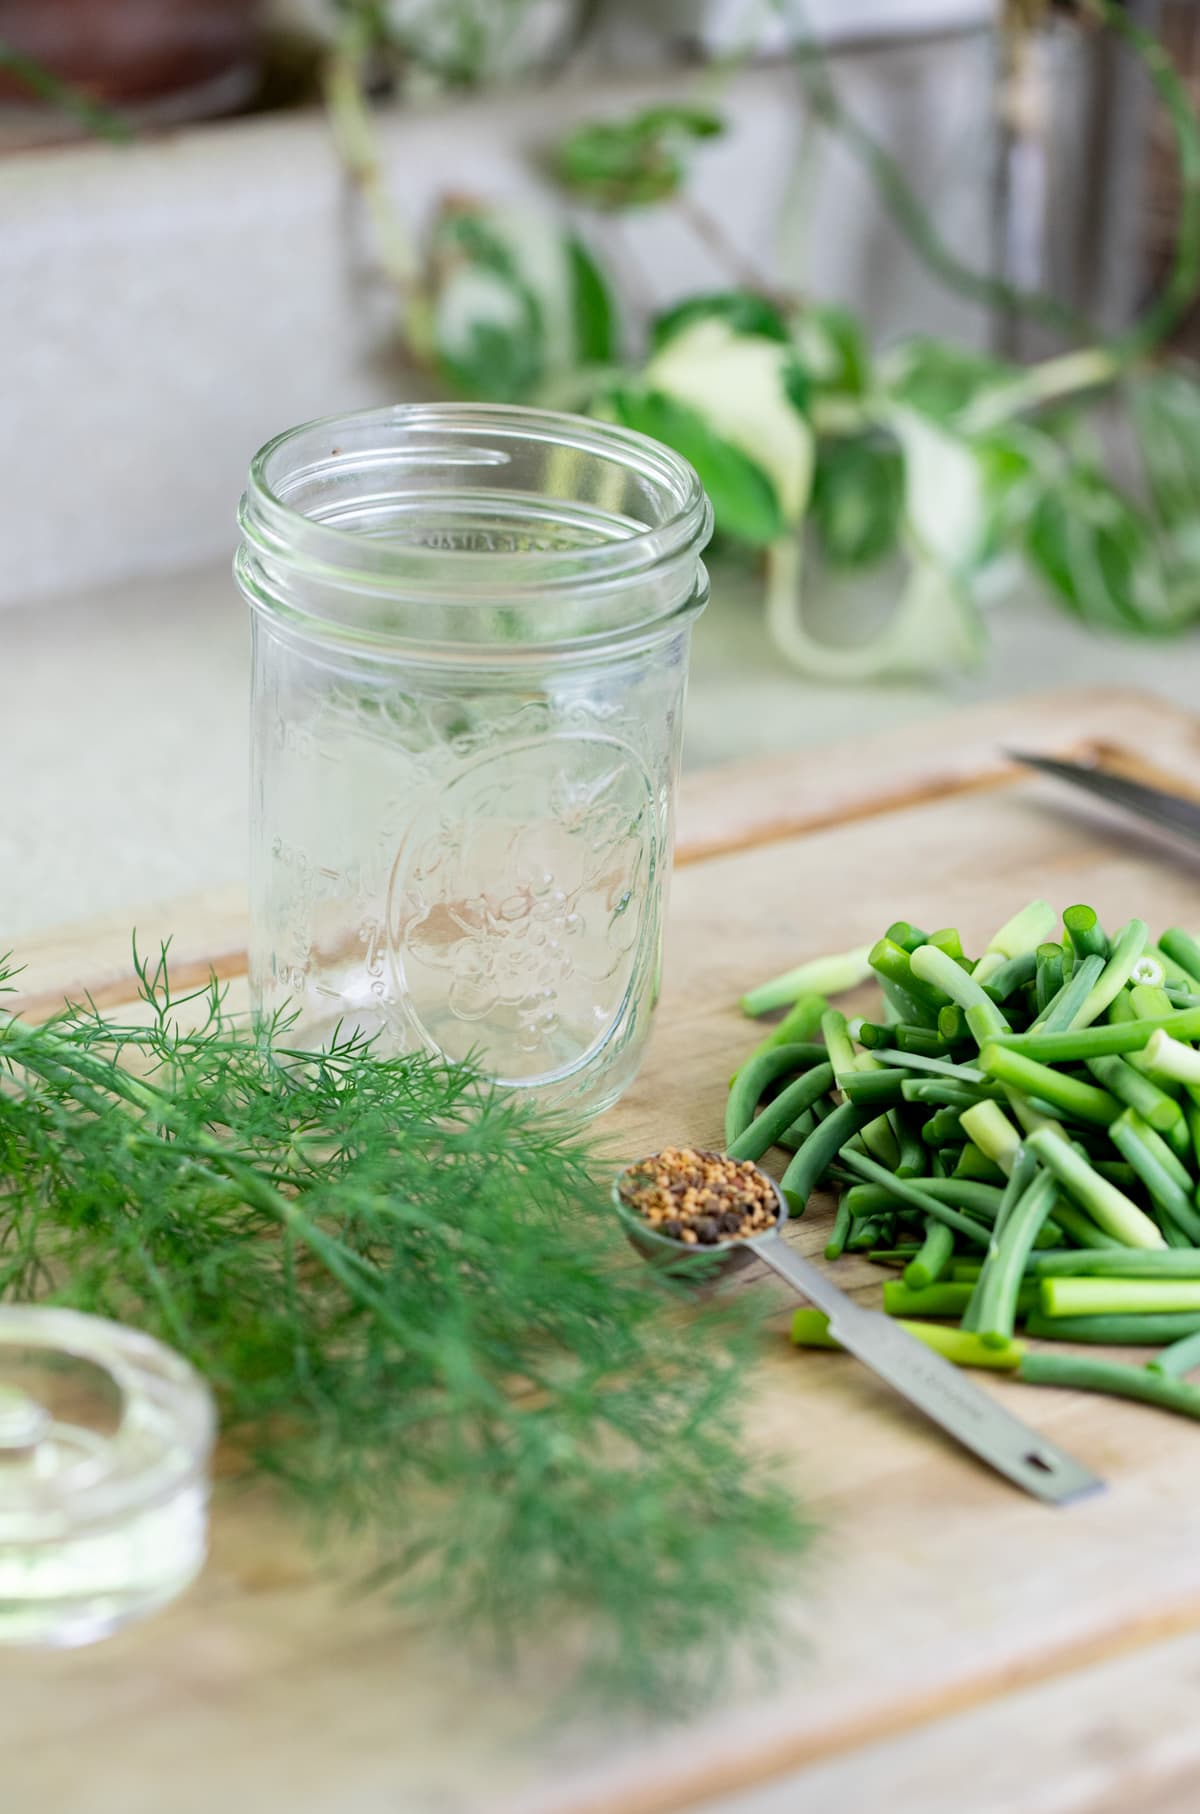 ingredients for fermented garlic scapes